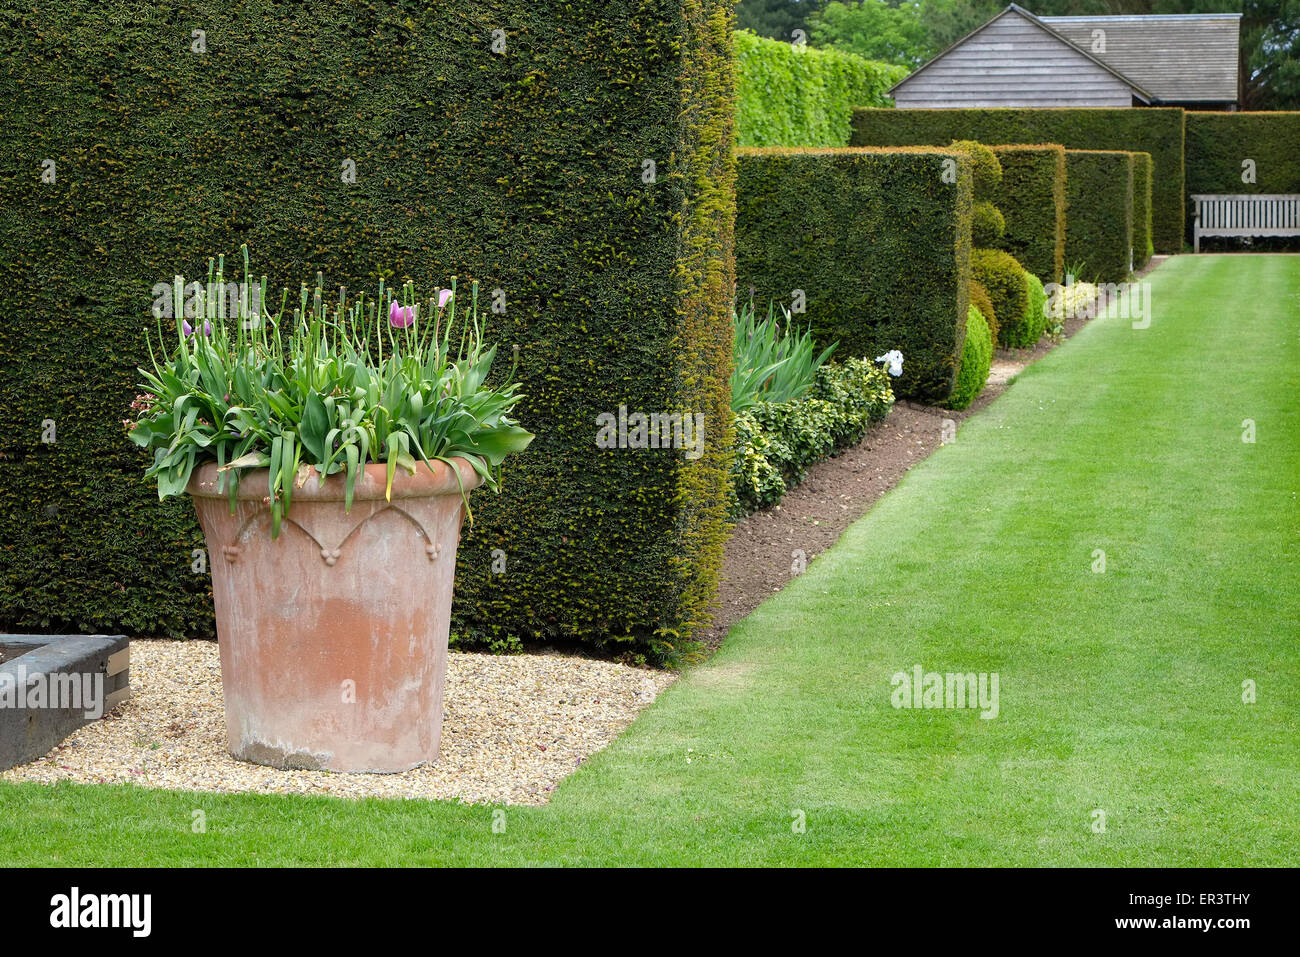 clipped hedges and cut grass lawn in garden Stock Photo